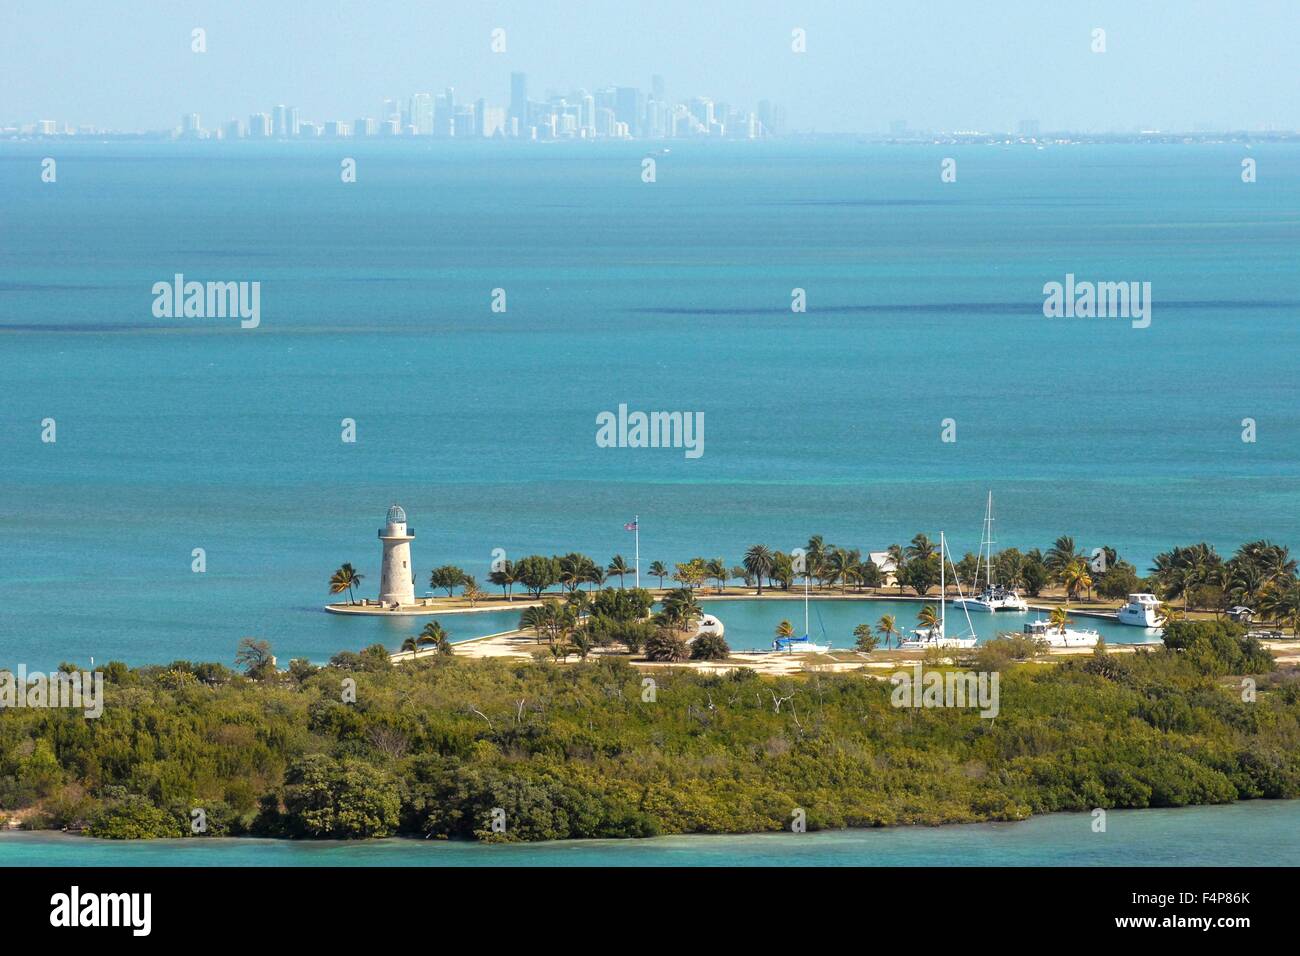 Aerial view of the Biscayne Bay National Park with the skyline of Miami, Florida. Stock Photo